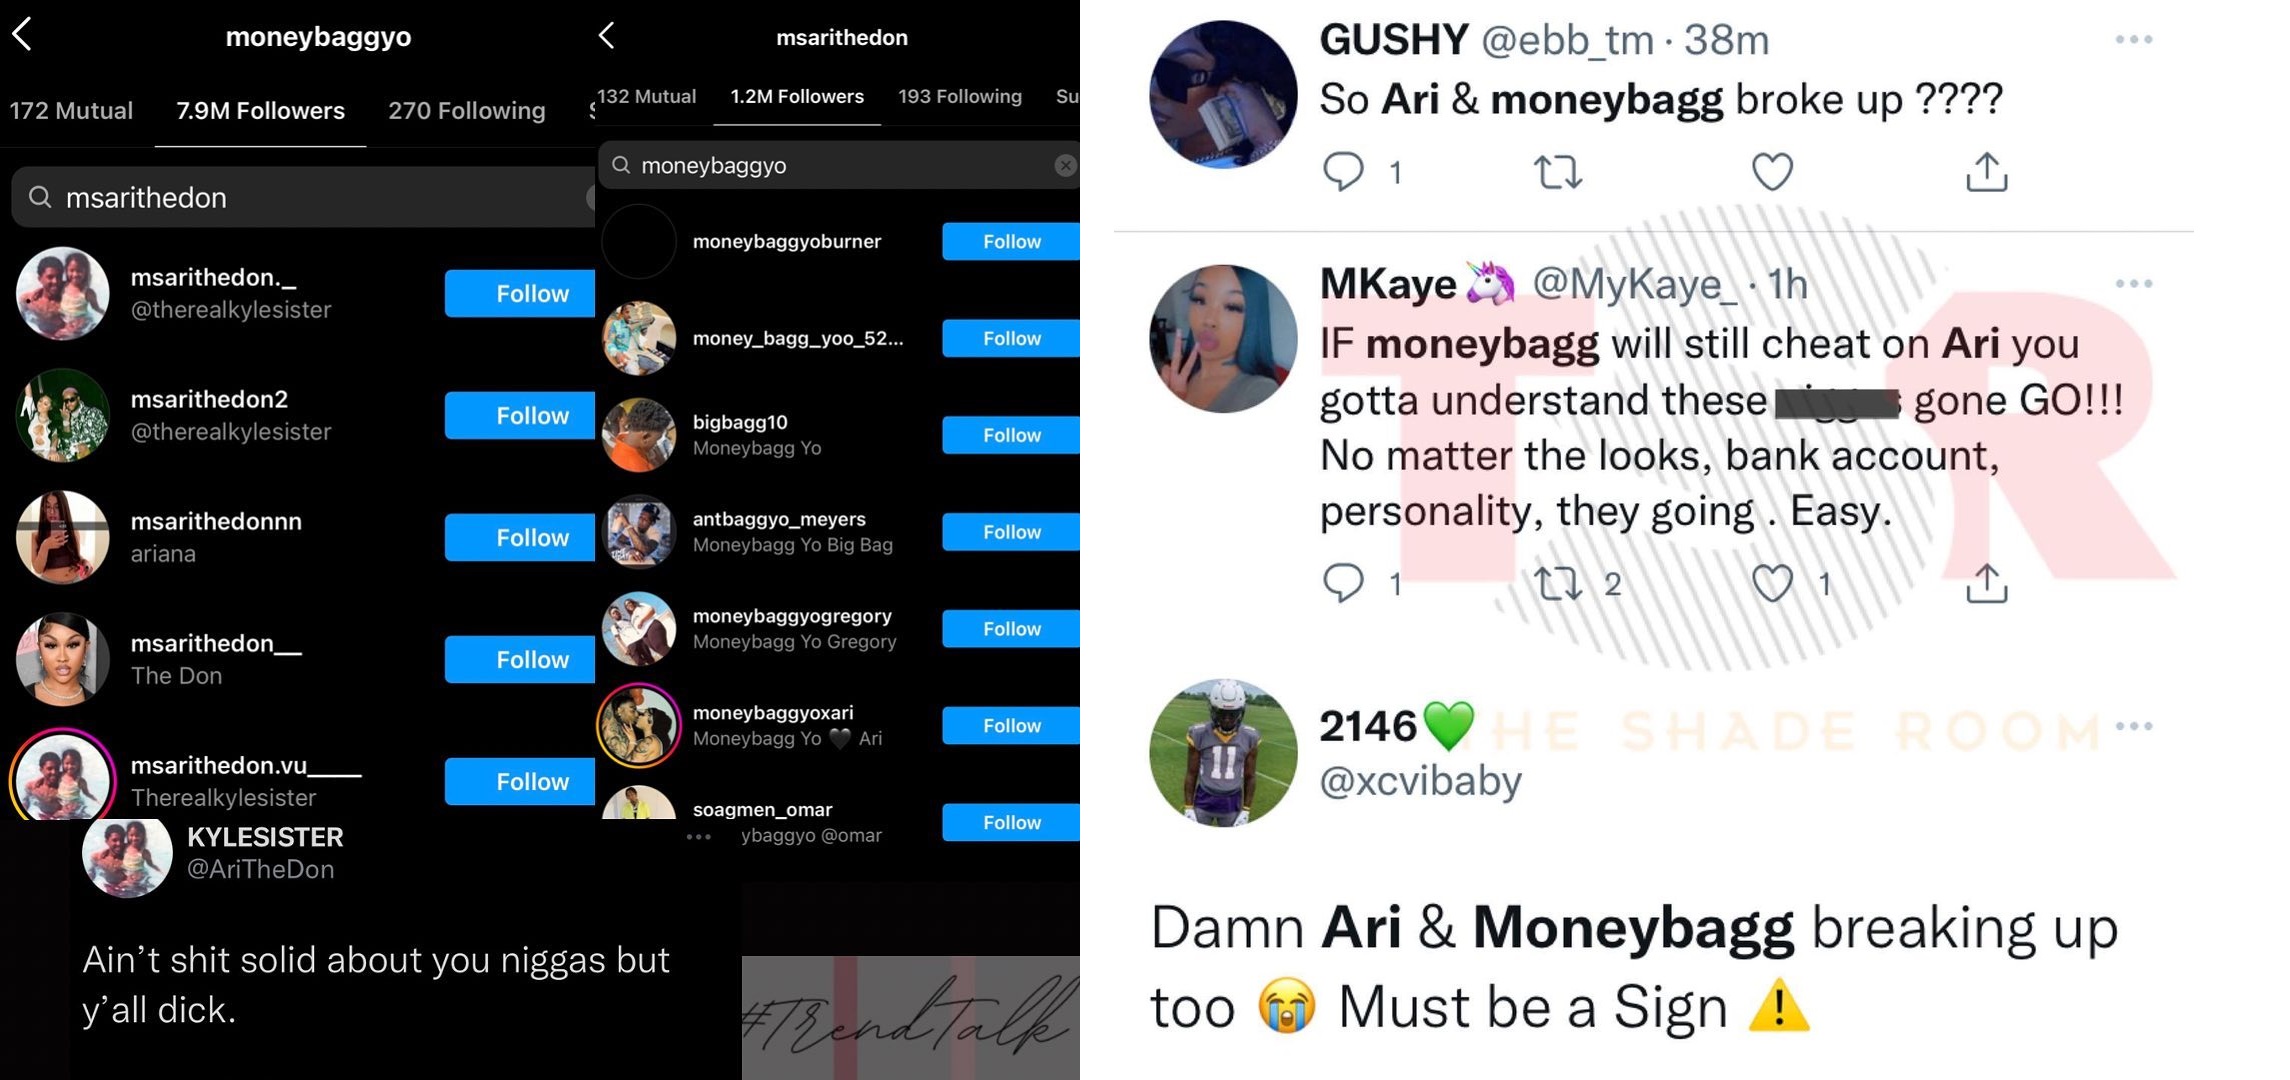 Ari and Moneybagg Yo have unfollowed each other on Instagram